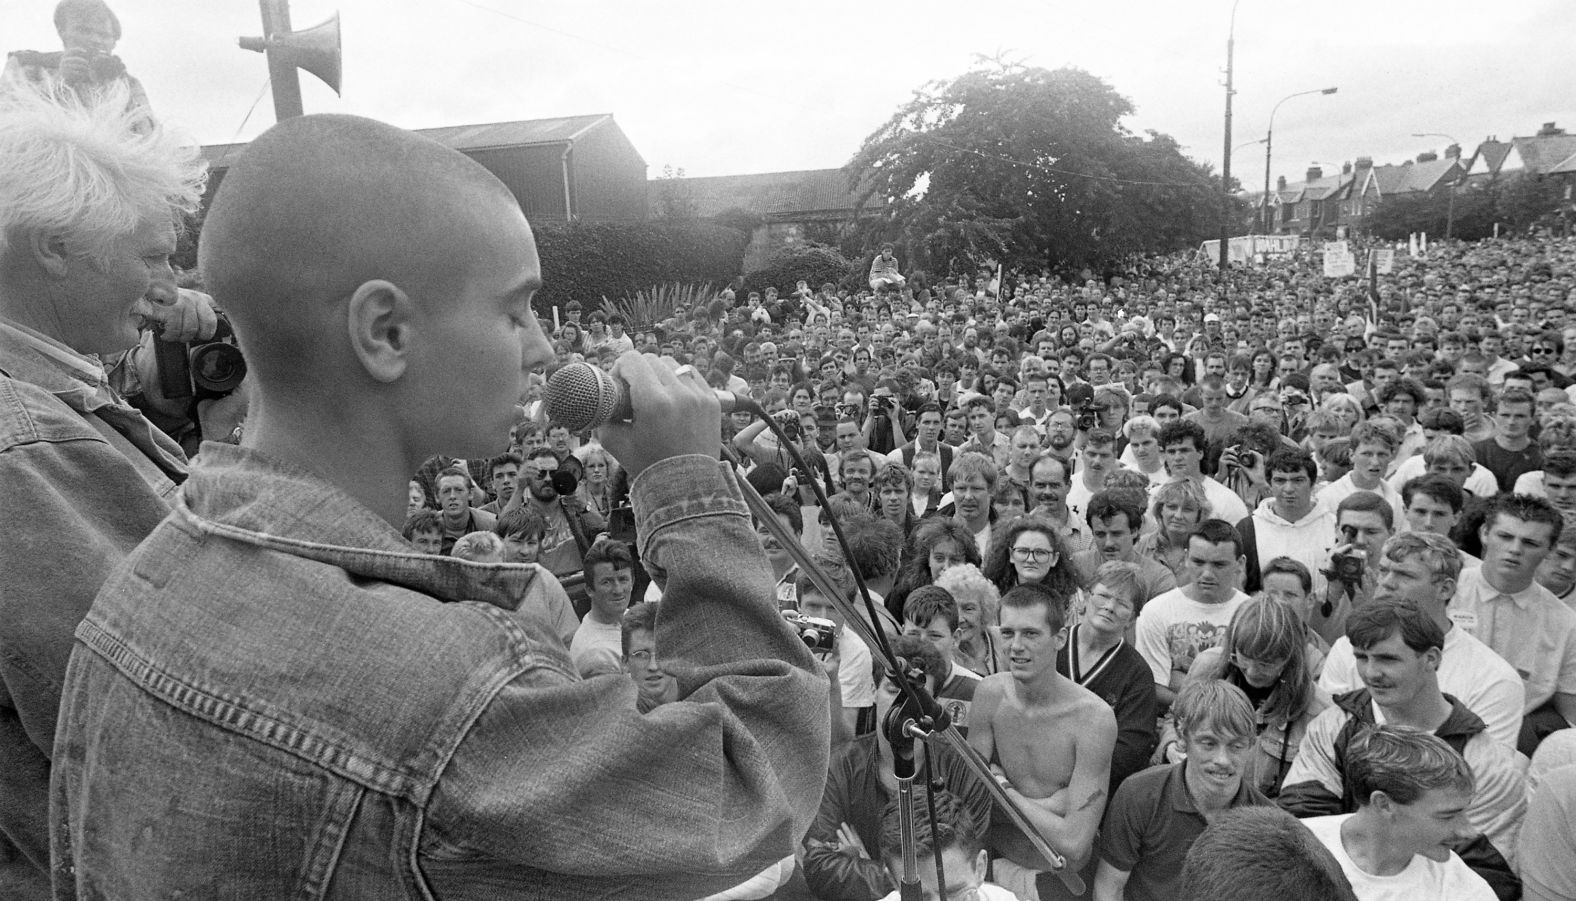 O'Connor performs in Dublin, Ireland, in 1989. It was part of a gathering marking the 20th anniversary of a march on the British Embassy there.